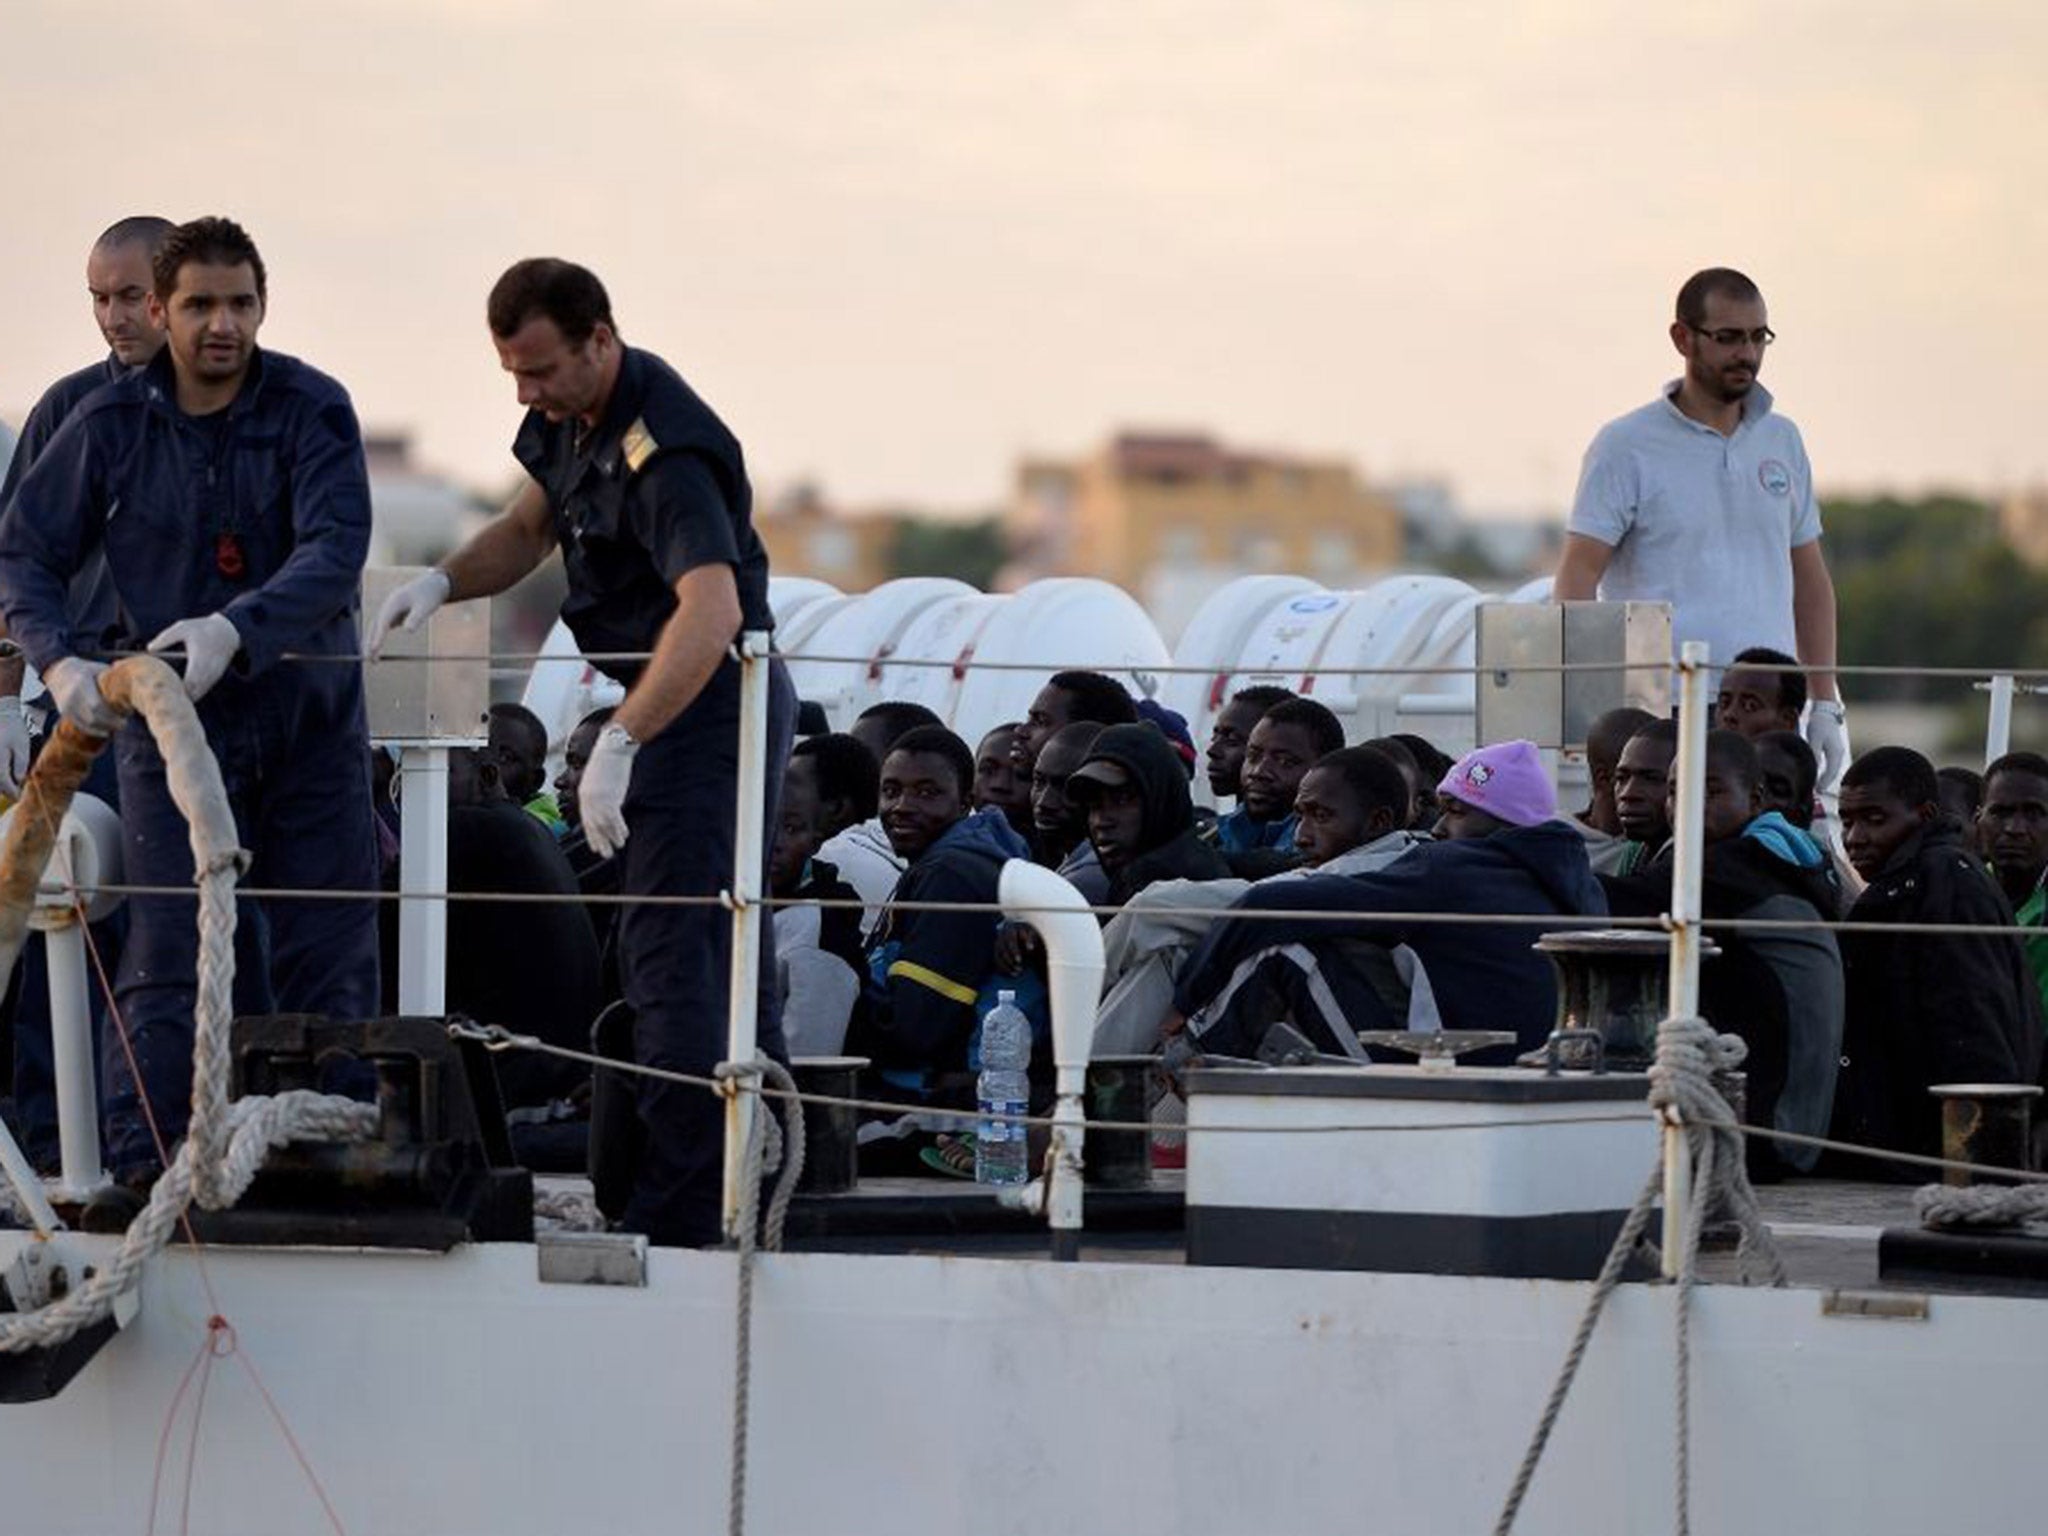 Some 100 migrants sit on the Guardia Costiera boat after being rescued off the shores of the island of Lampedusa last year